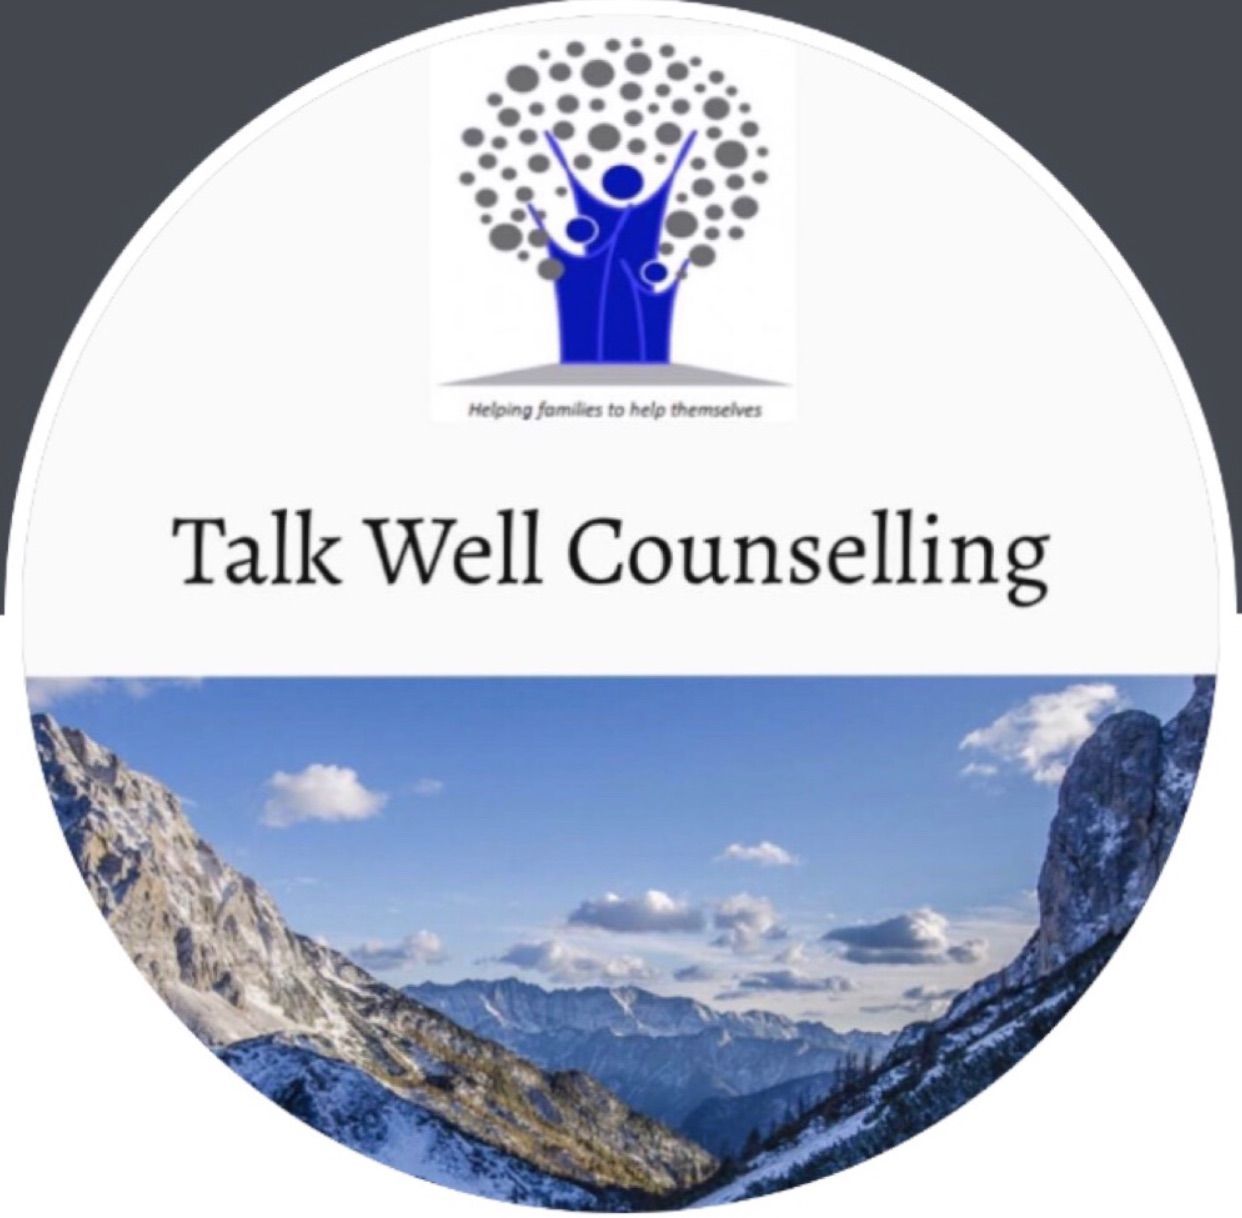 Gallery Photo of Talkwell Counselling Service 